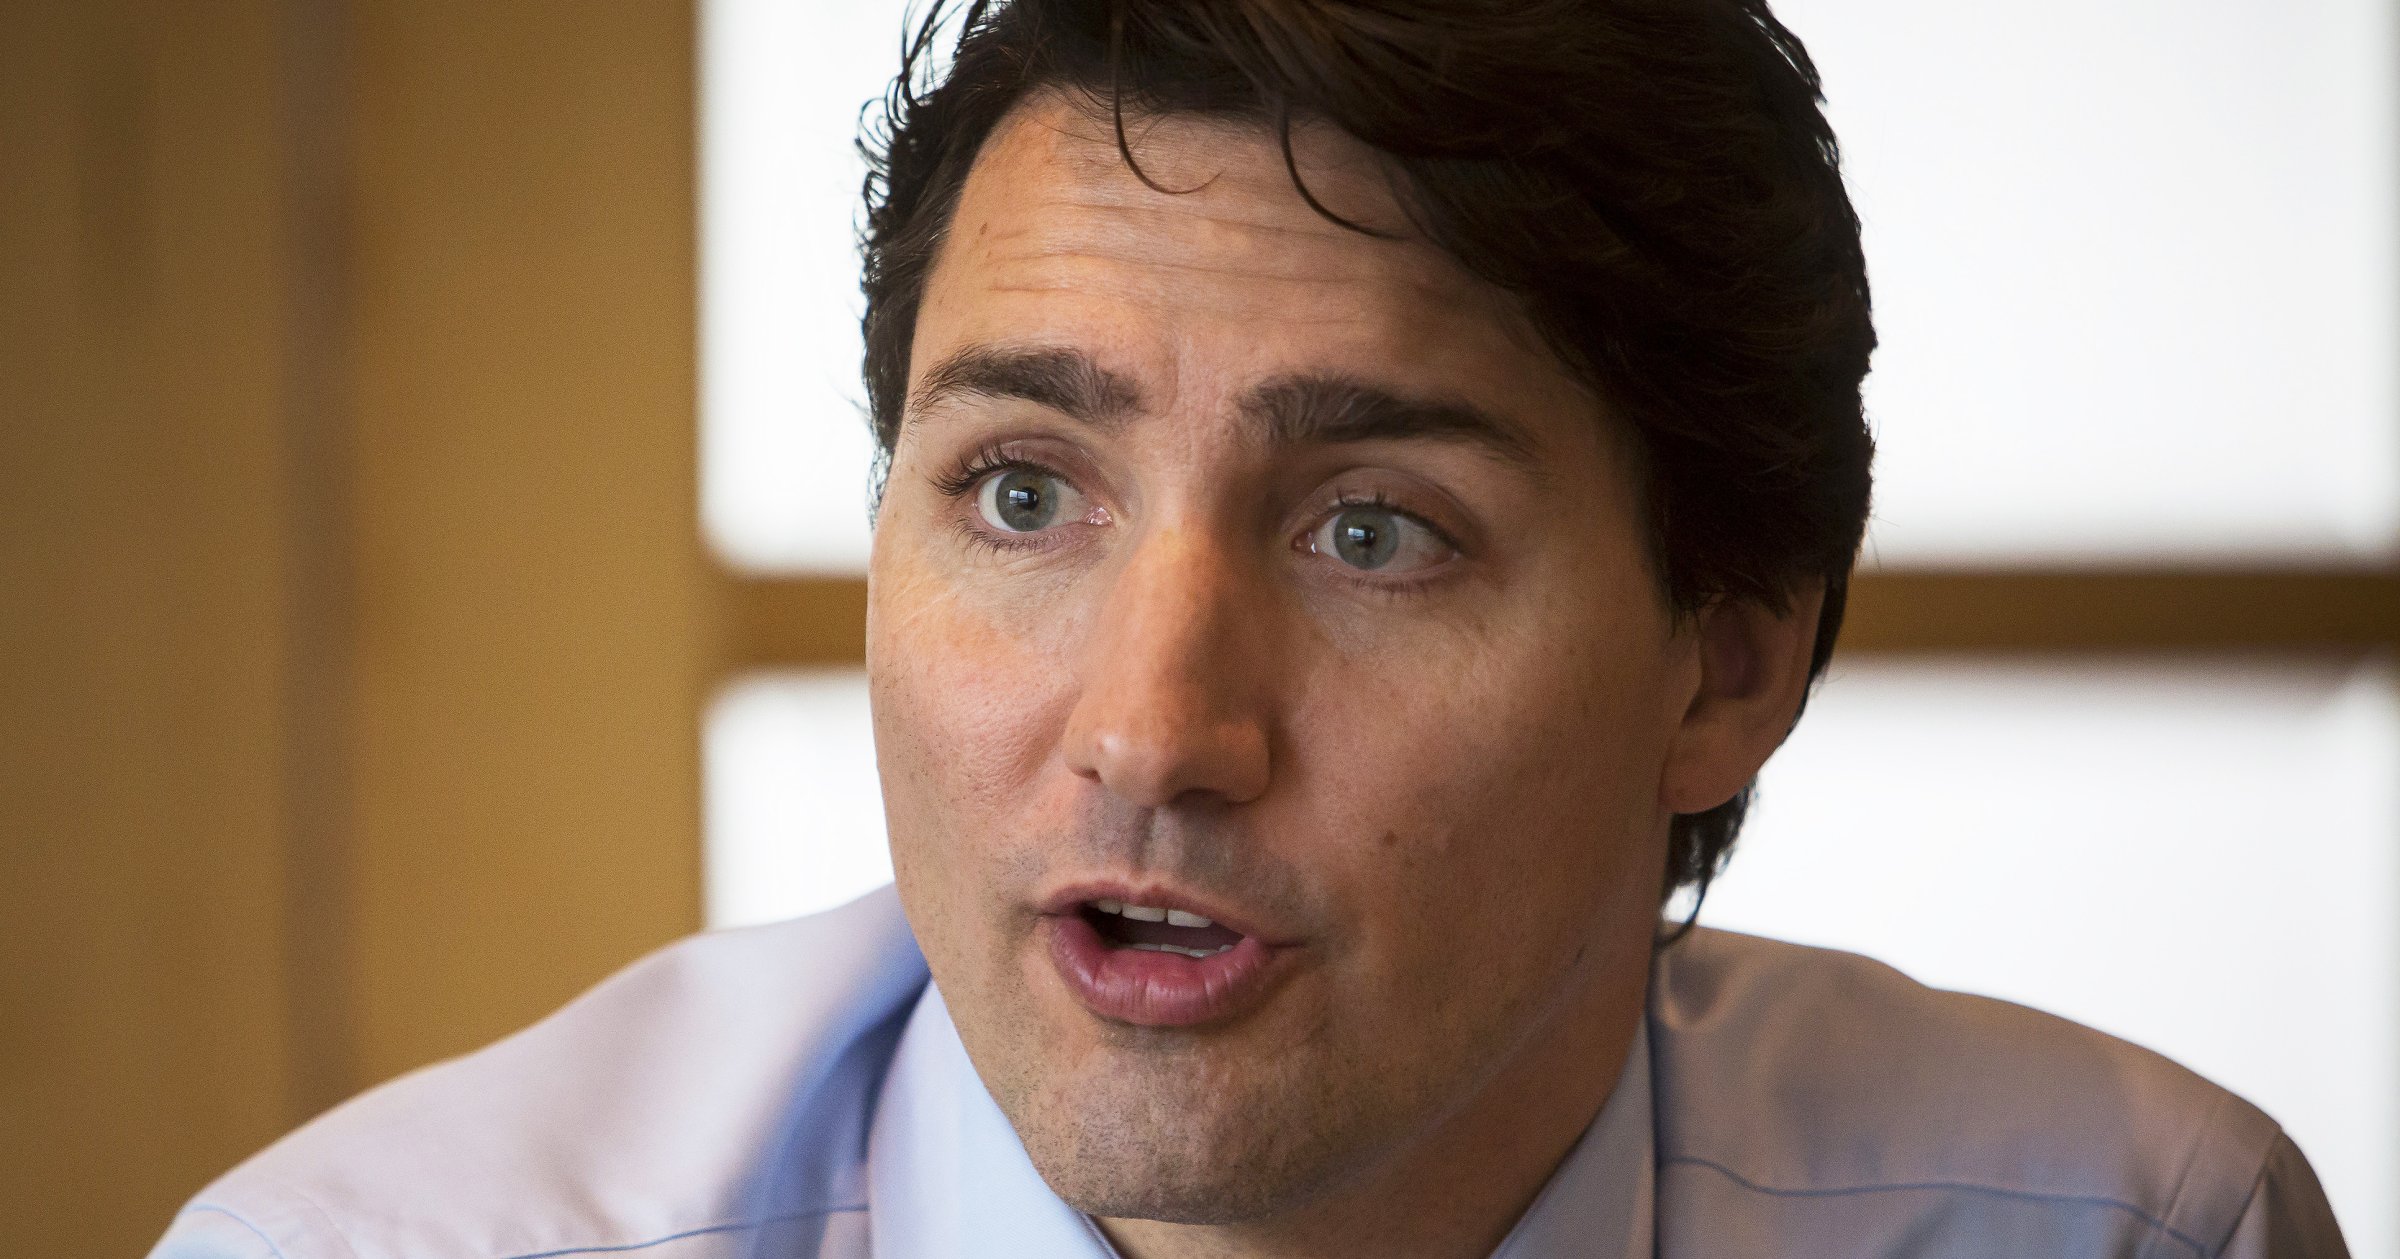 Justin Trudeau in Vancouver, British Columbia, Canada on March 2, 2016.